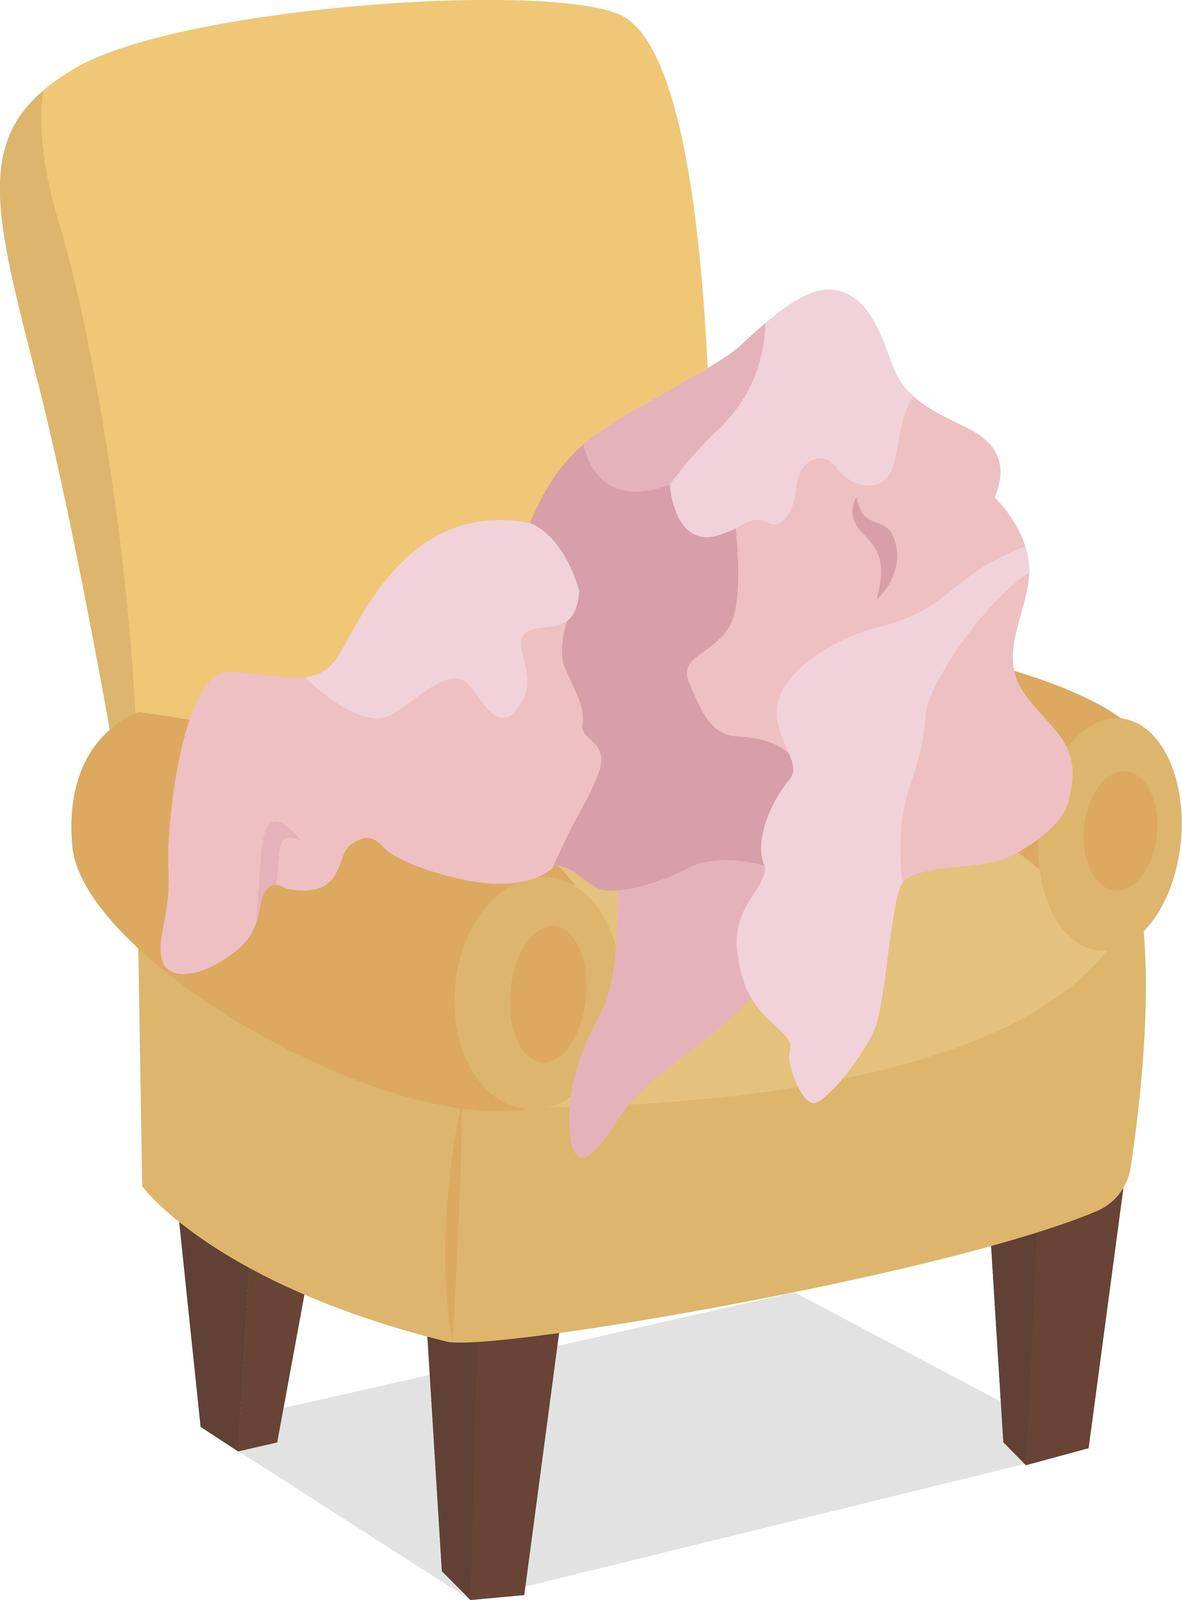 Leaving dirty clothes on armchair semi flat color vector object. Full sized item on white. Dirty laundry on chair isolated modern cartoon style illustration for graphic design and animation